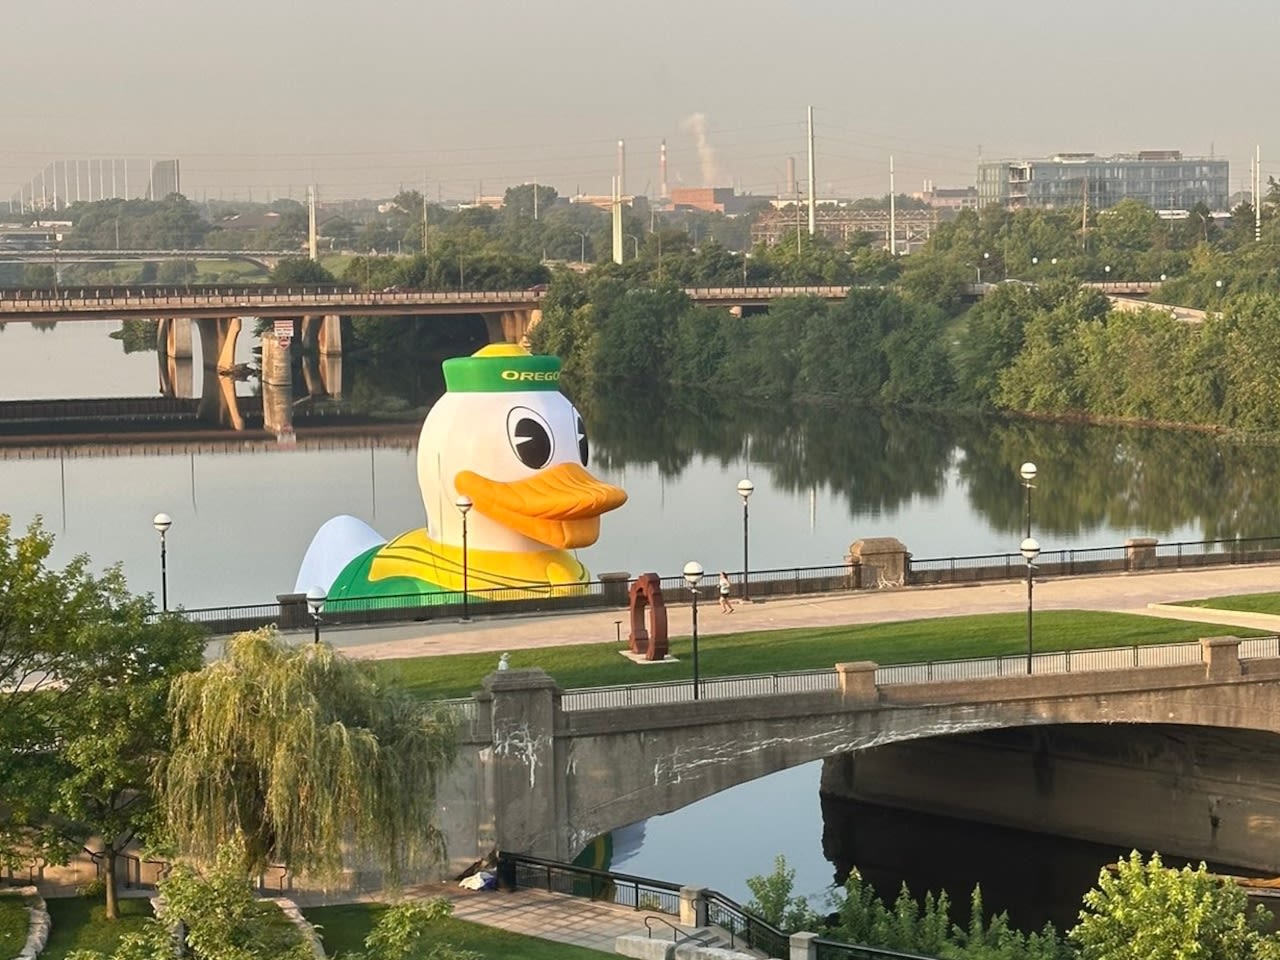 Oregon arrives in Big Ten country, sends giant, inflatable duck down river